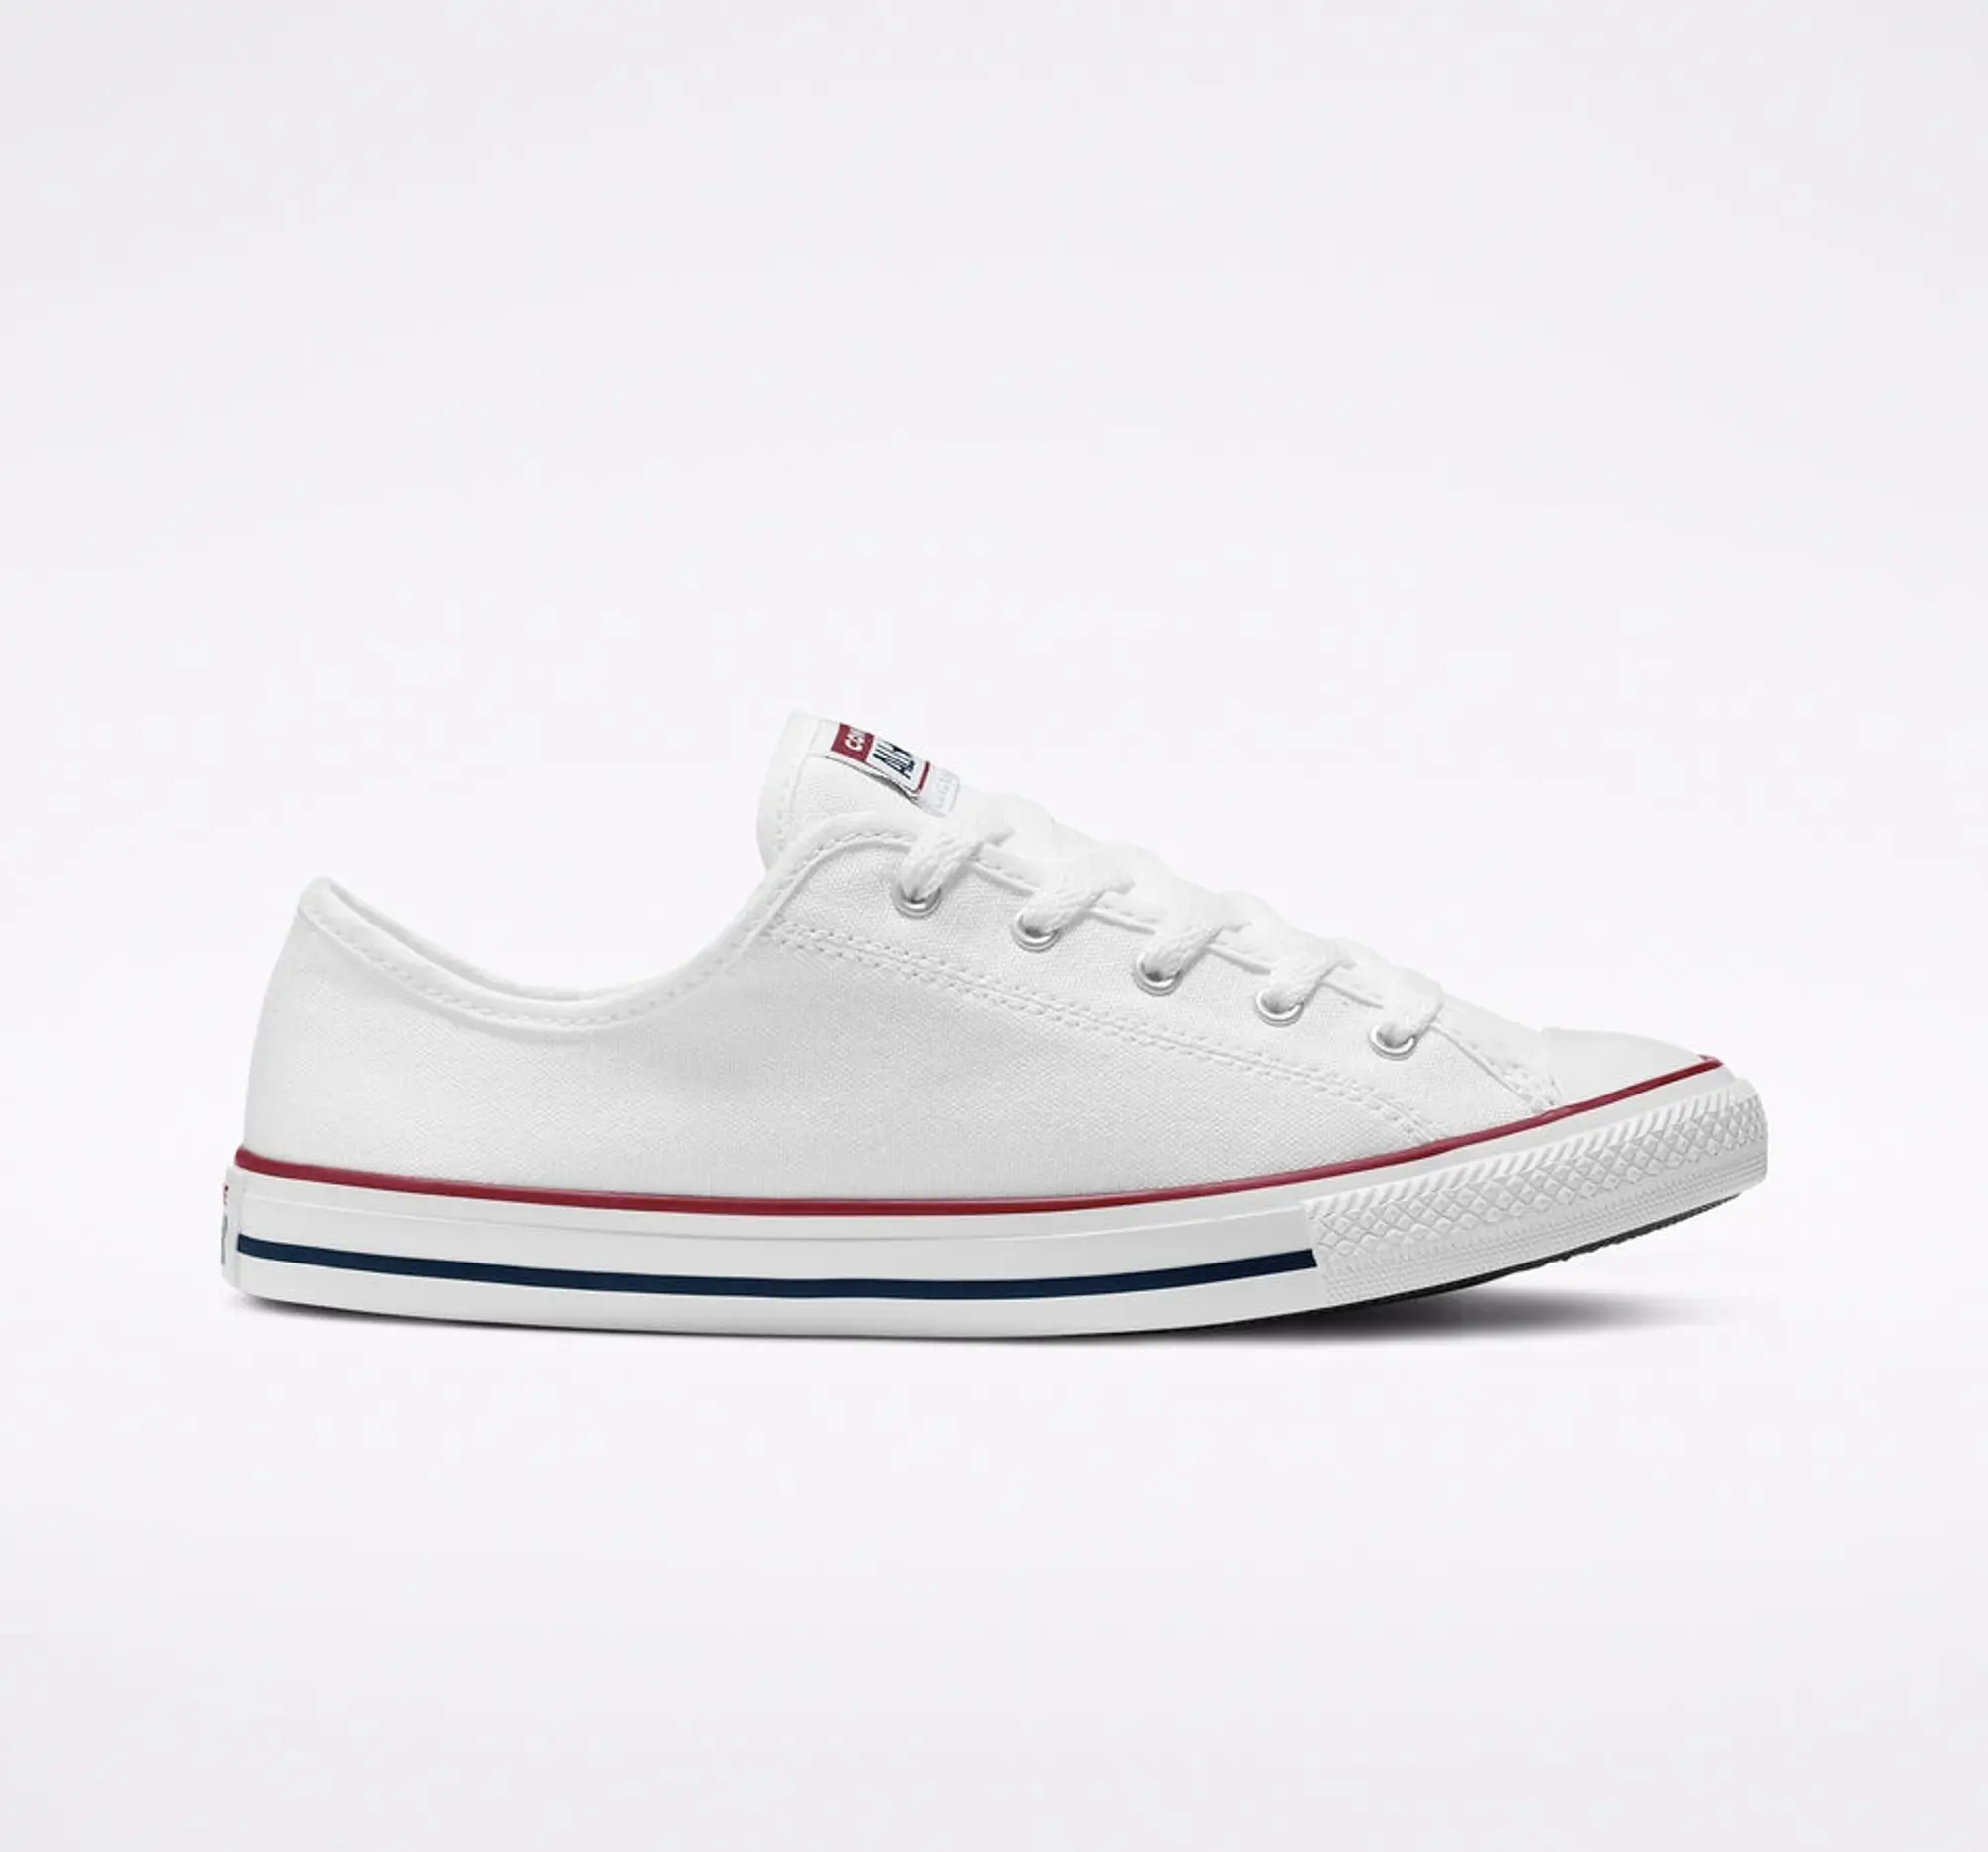 Converse all star dainty gs ox trainers in white